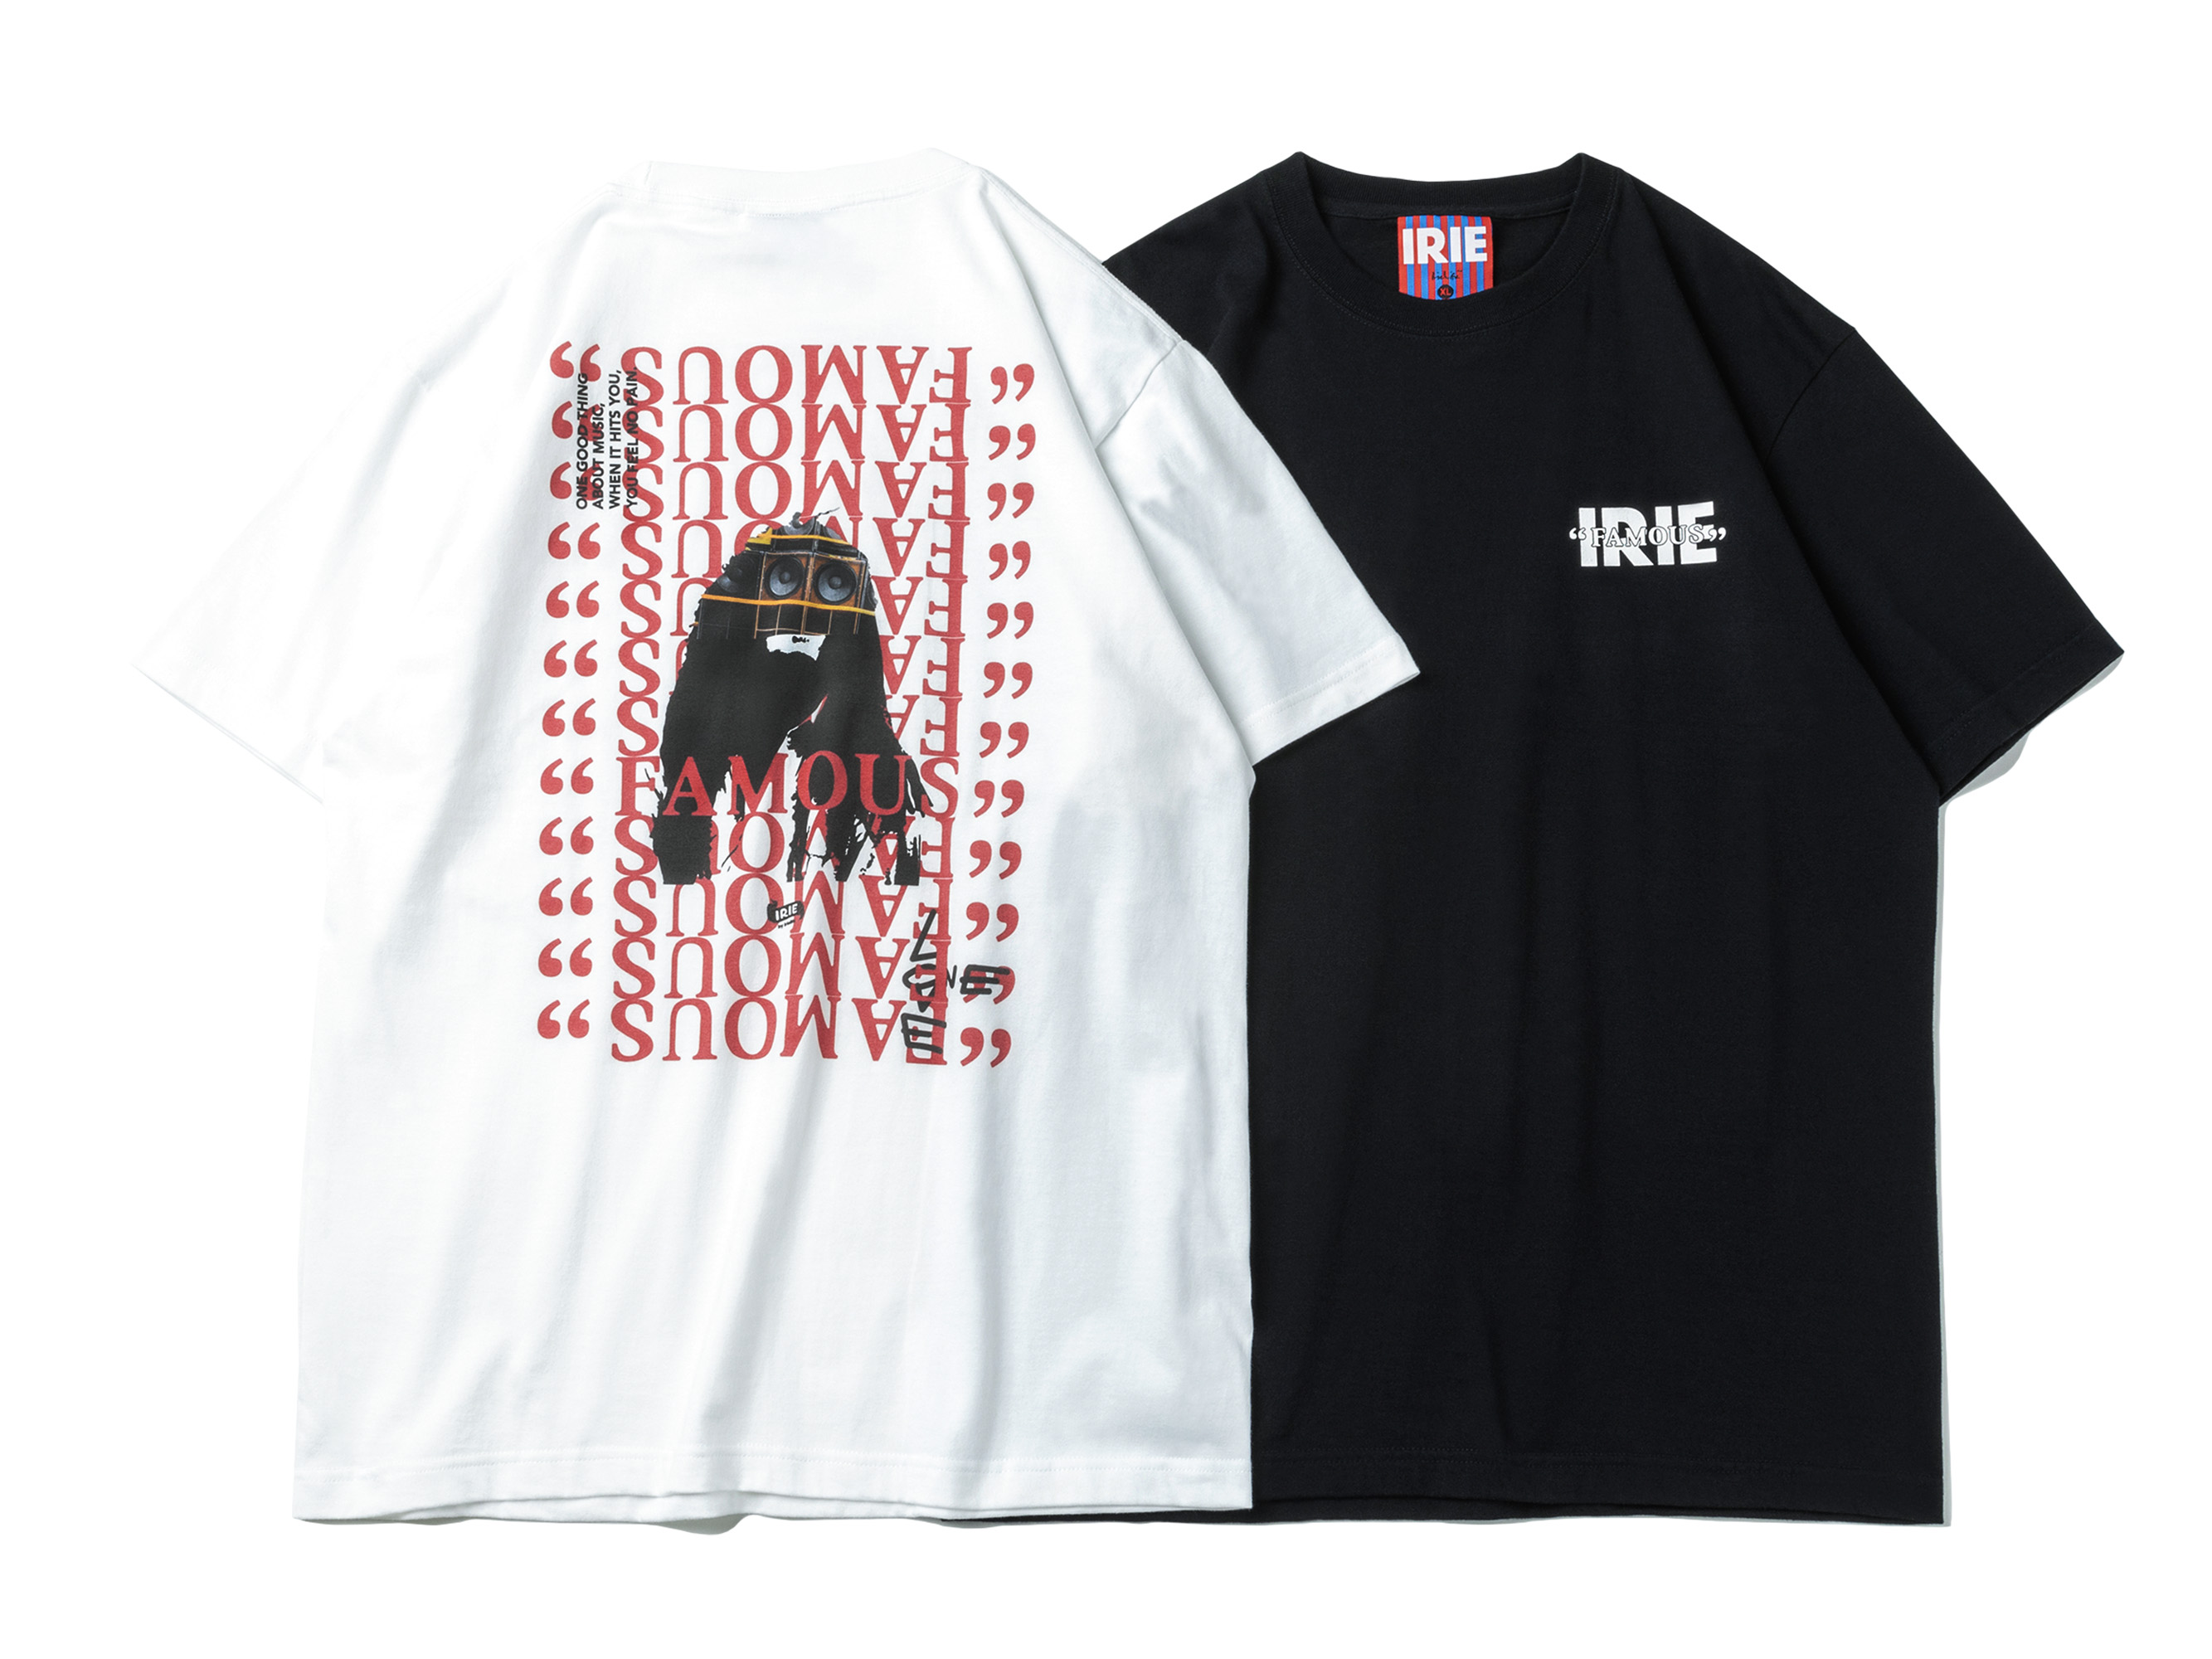 【20%OFF】FAMOUS MAN TEE - IRIE by irielife